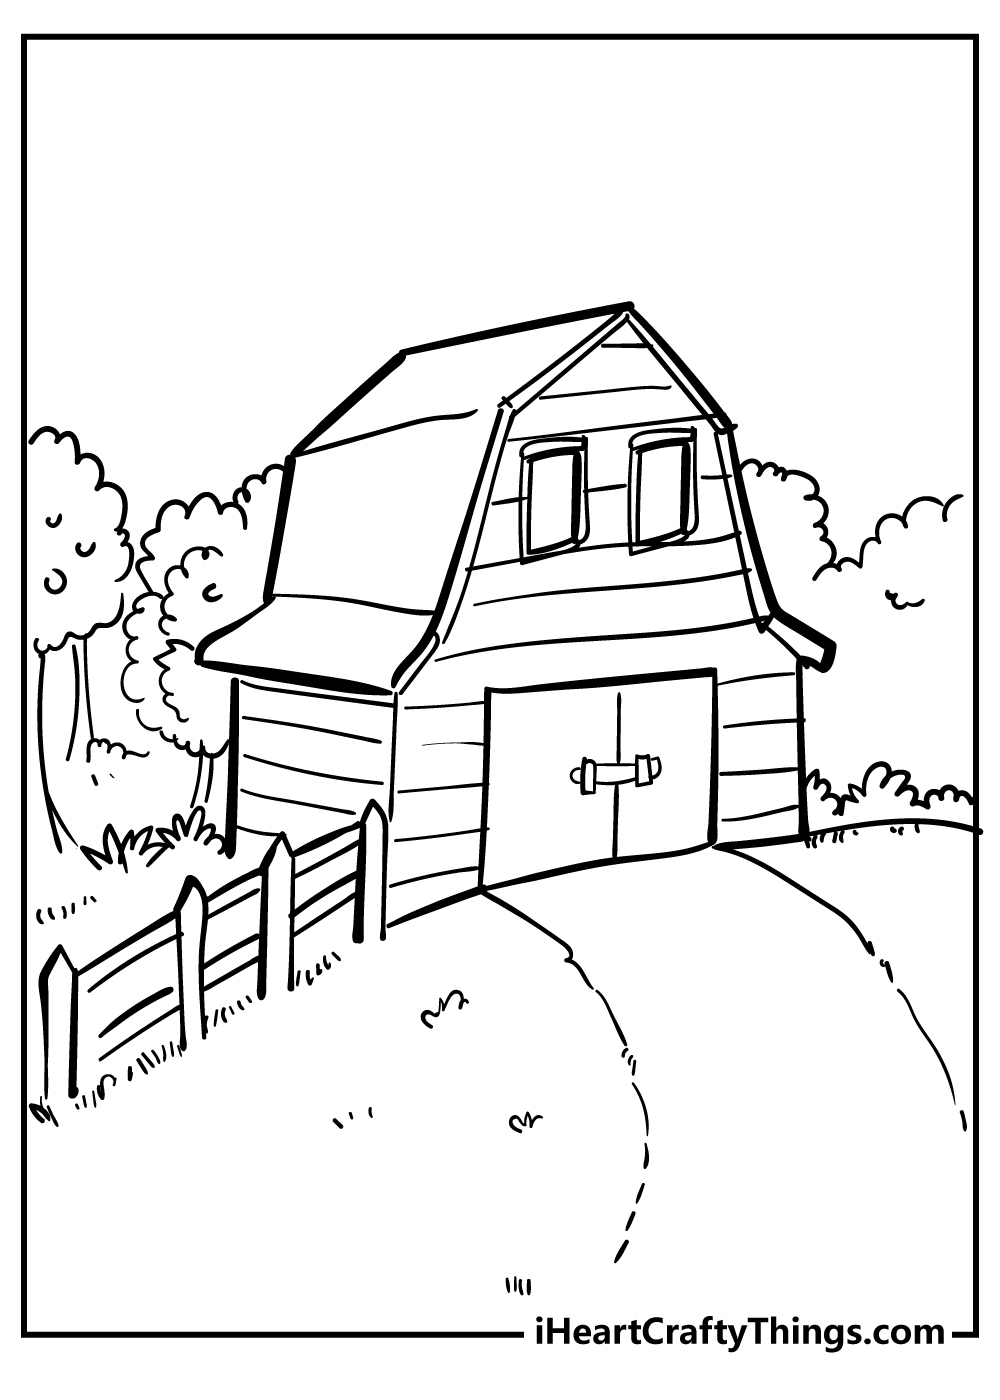 Barn Coloring Pages for kids free download